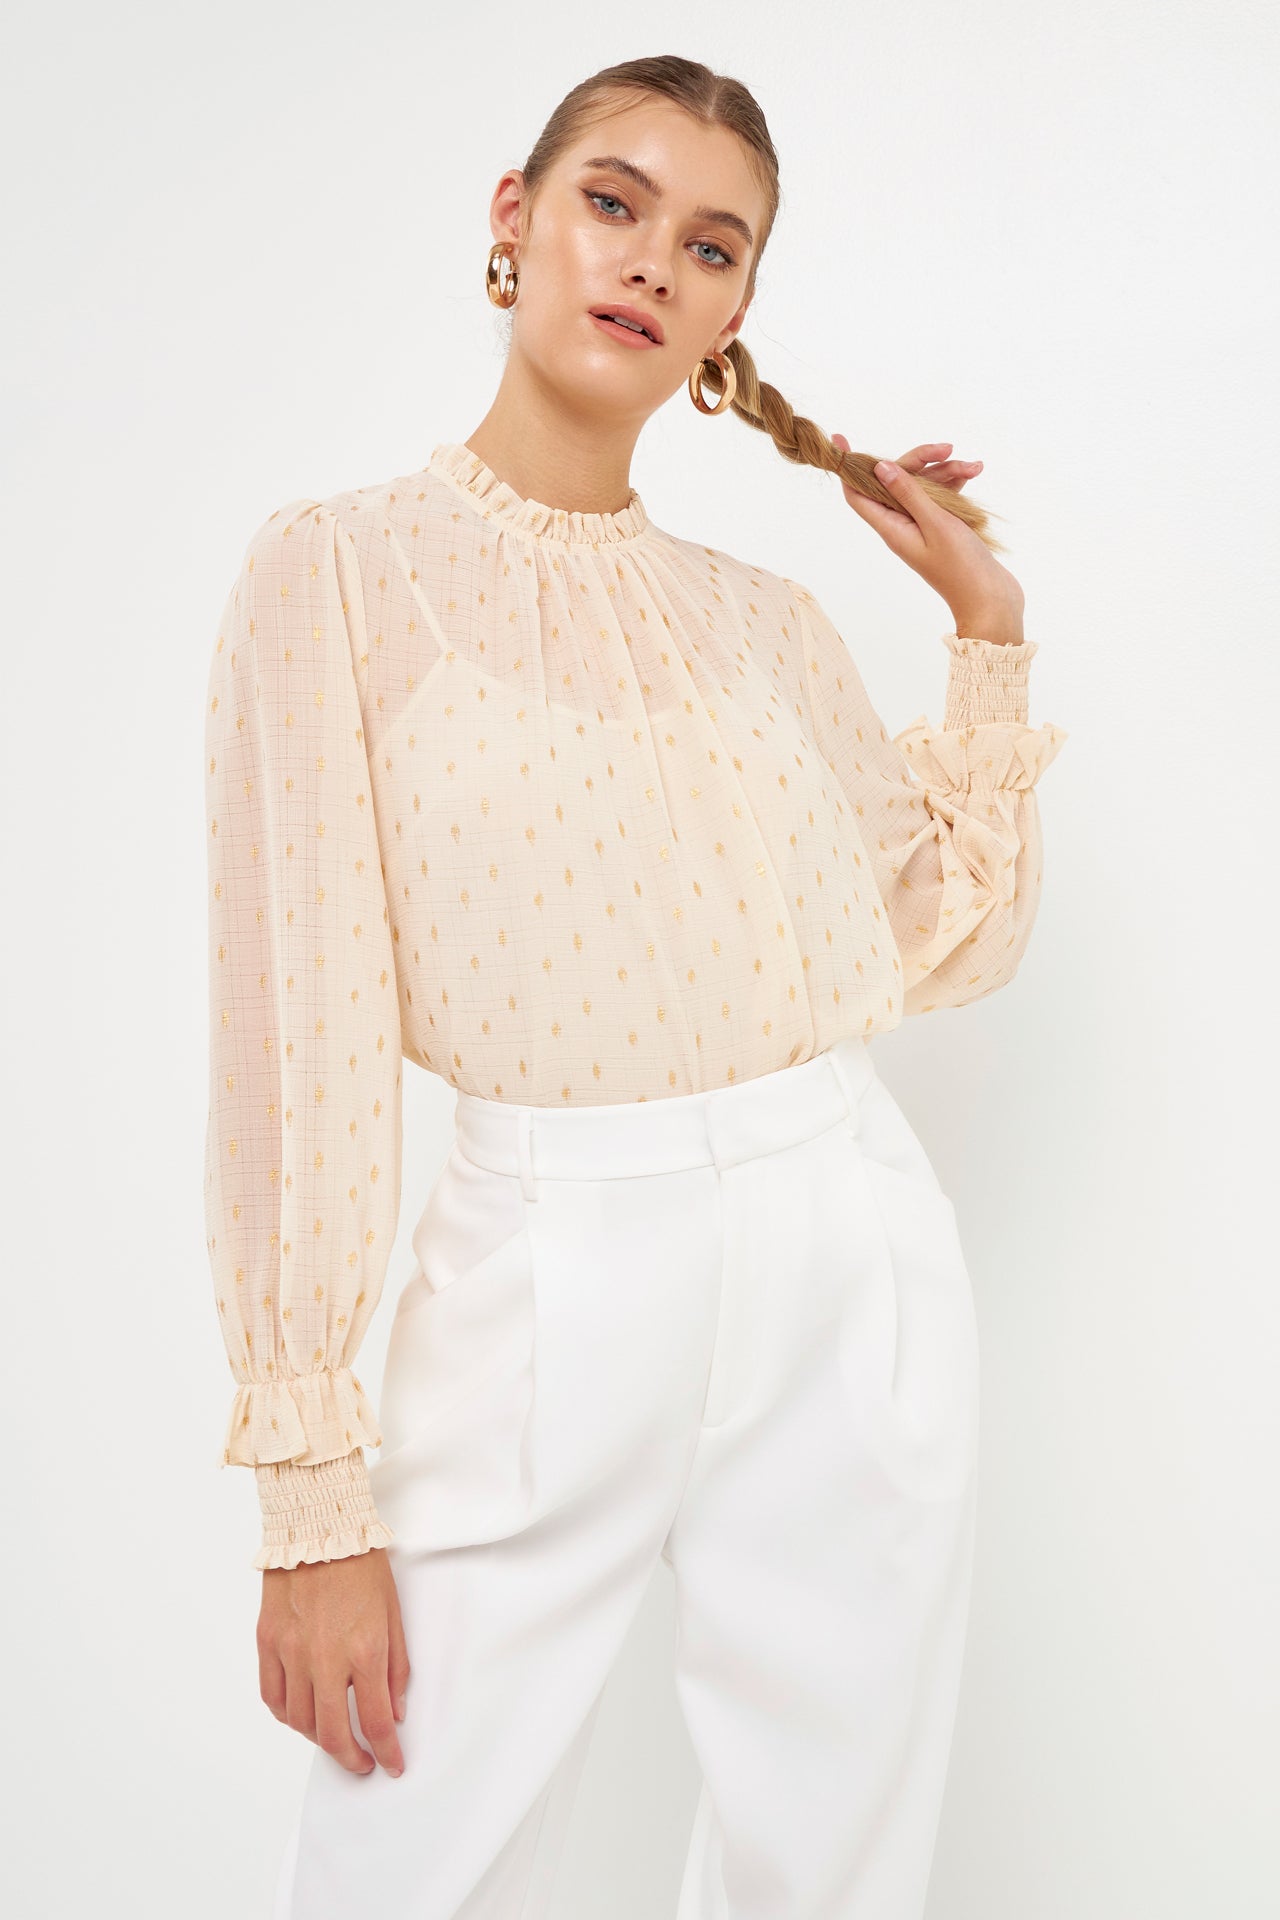 Endless Rose - Gold Foil Polka Dot Blouse - Shirts & blouses in Women's Clothing available at endlessrose.com